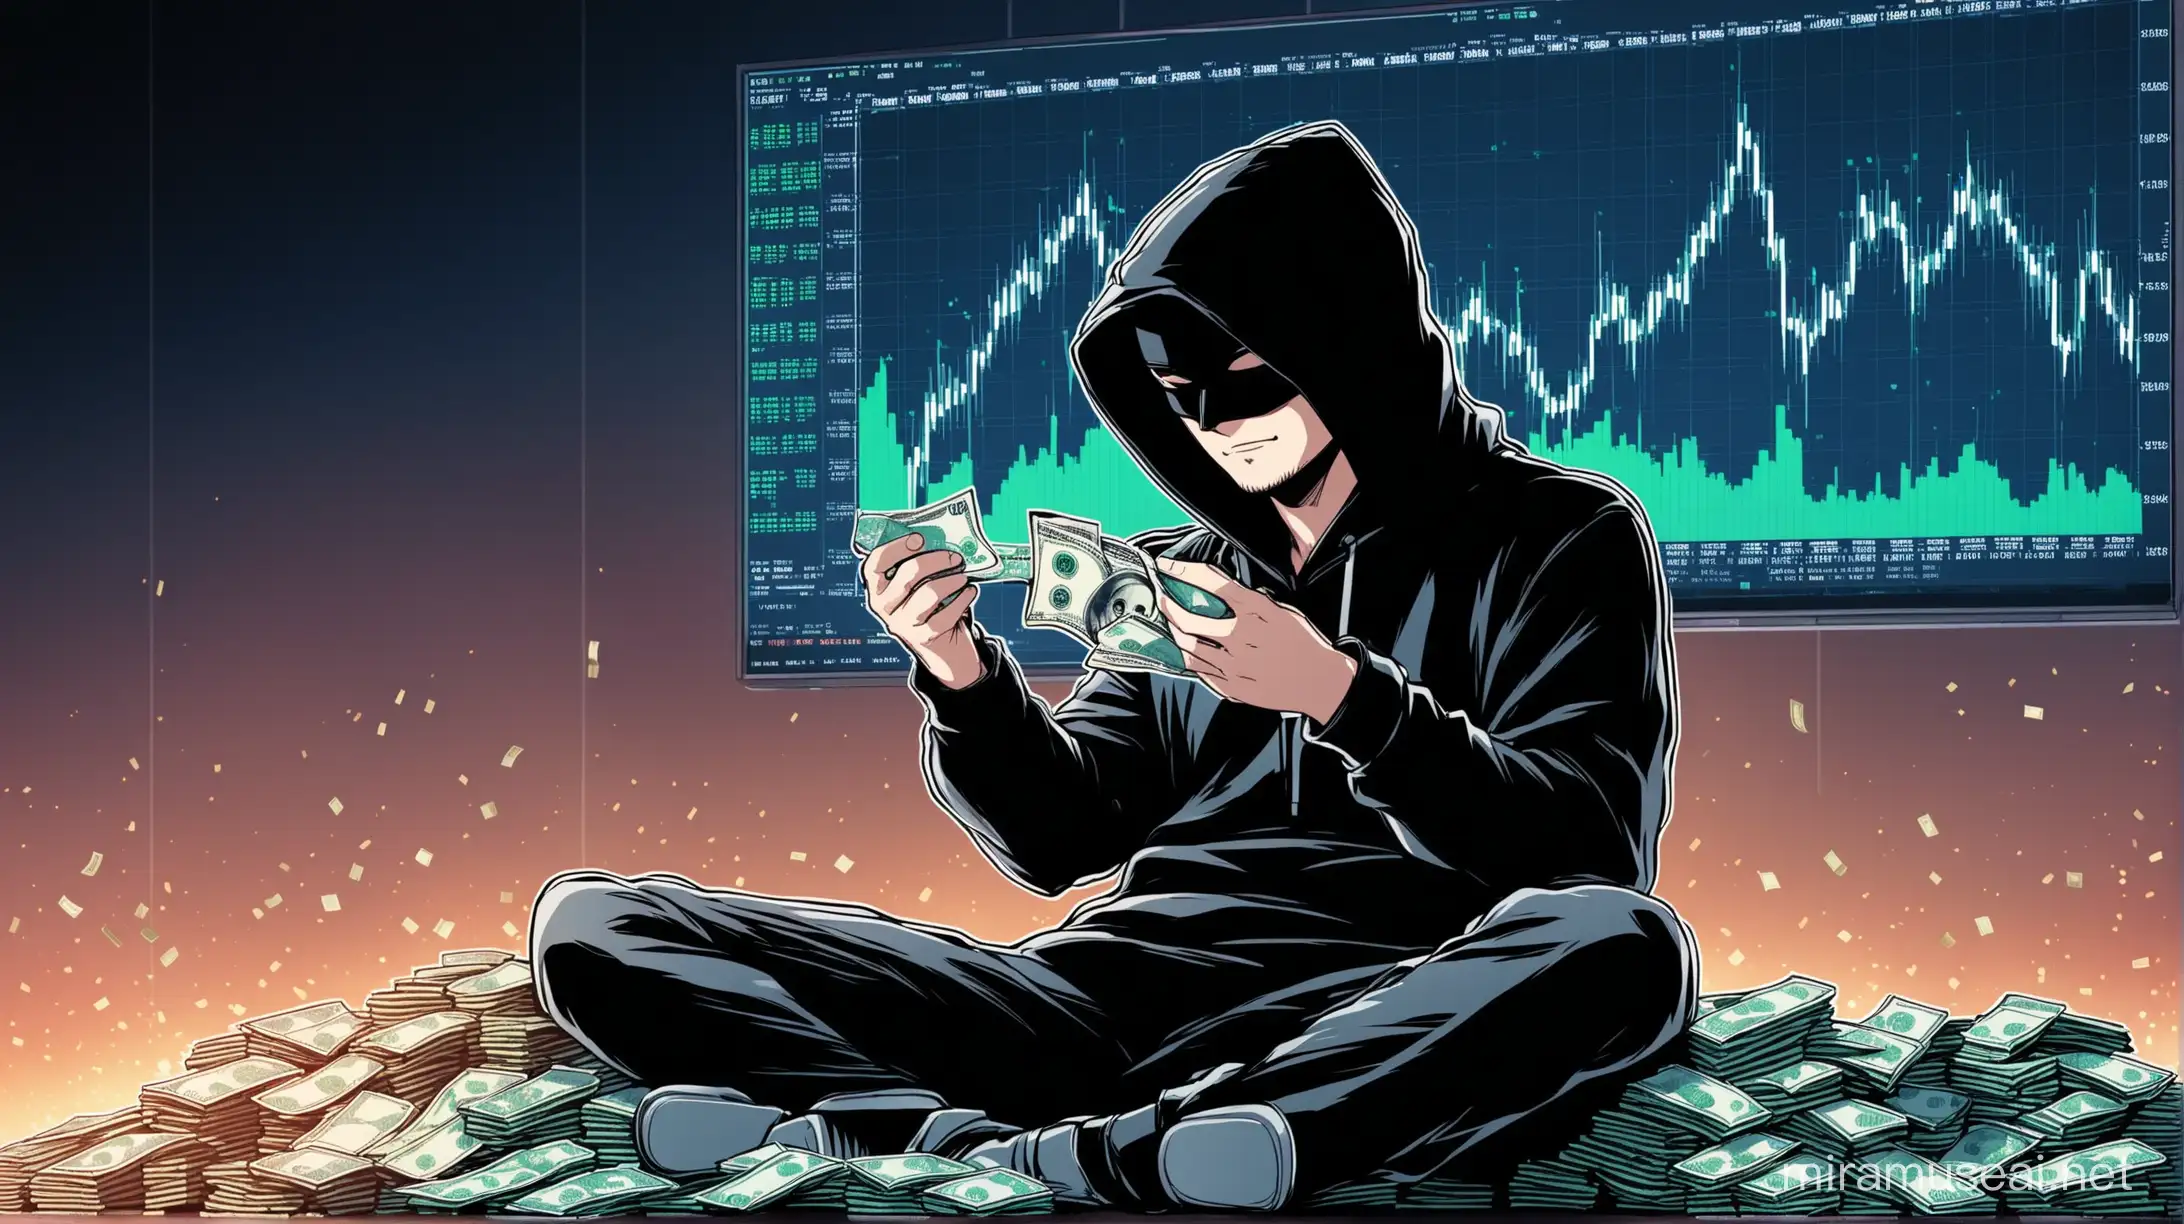 hacker sitting with money in his hands in front of big stock chart in background which  was going up but then dumped. make sure that the chart is at the bottom by the end